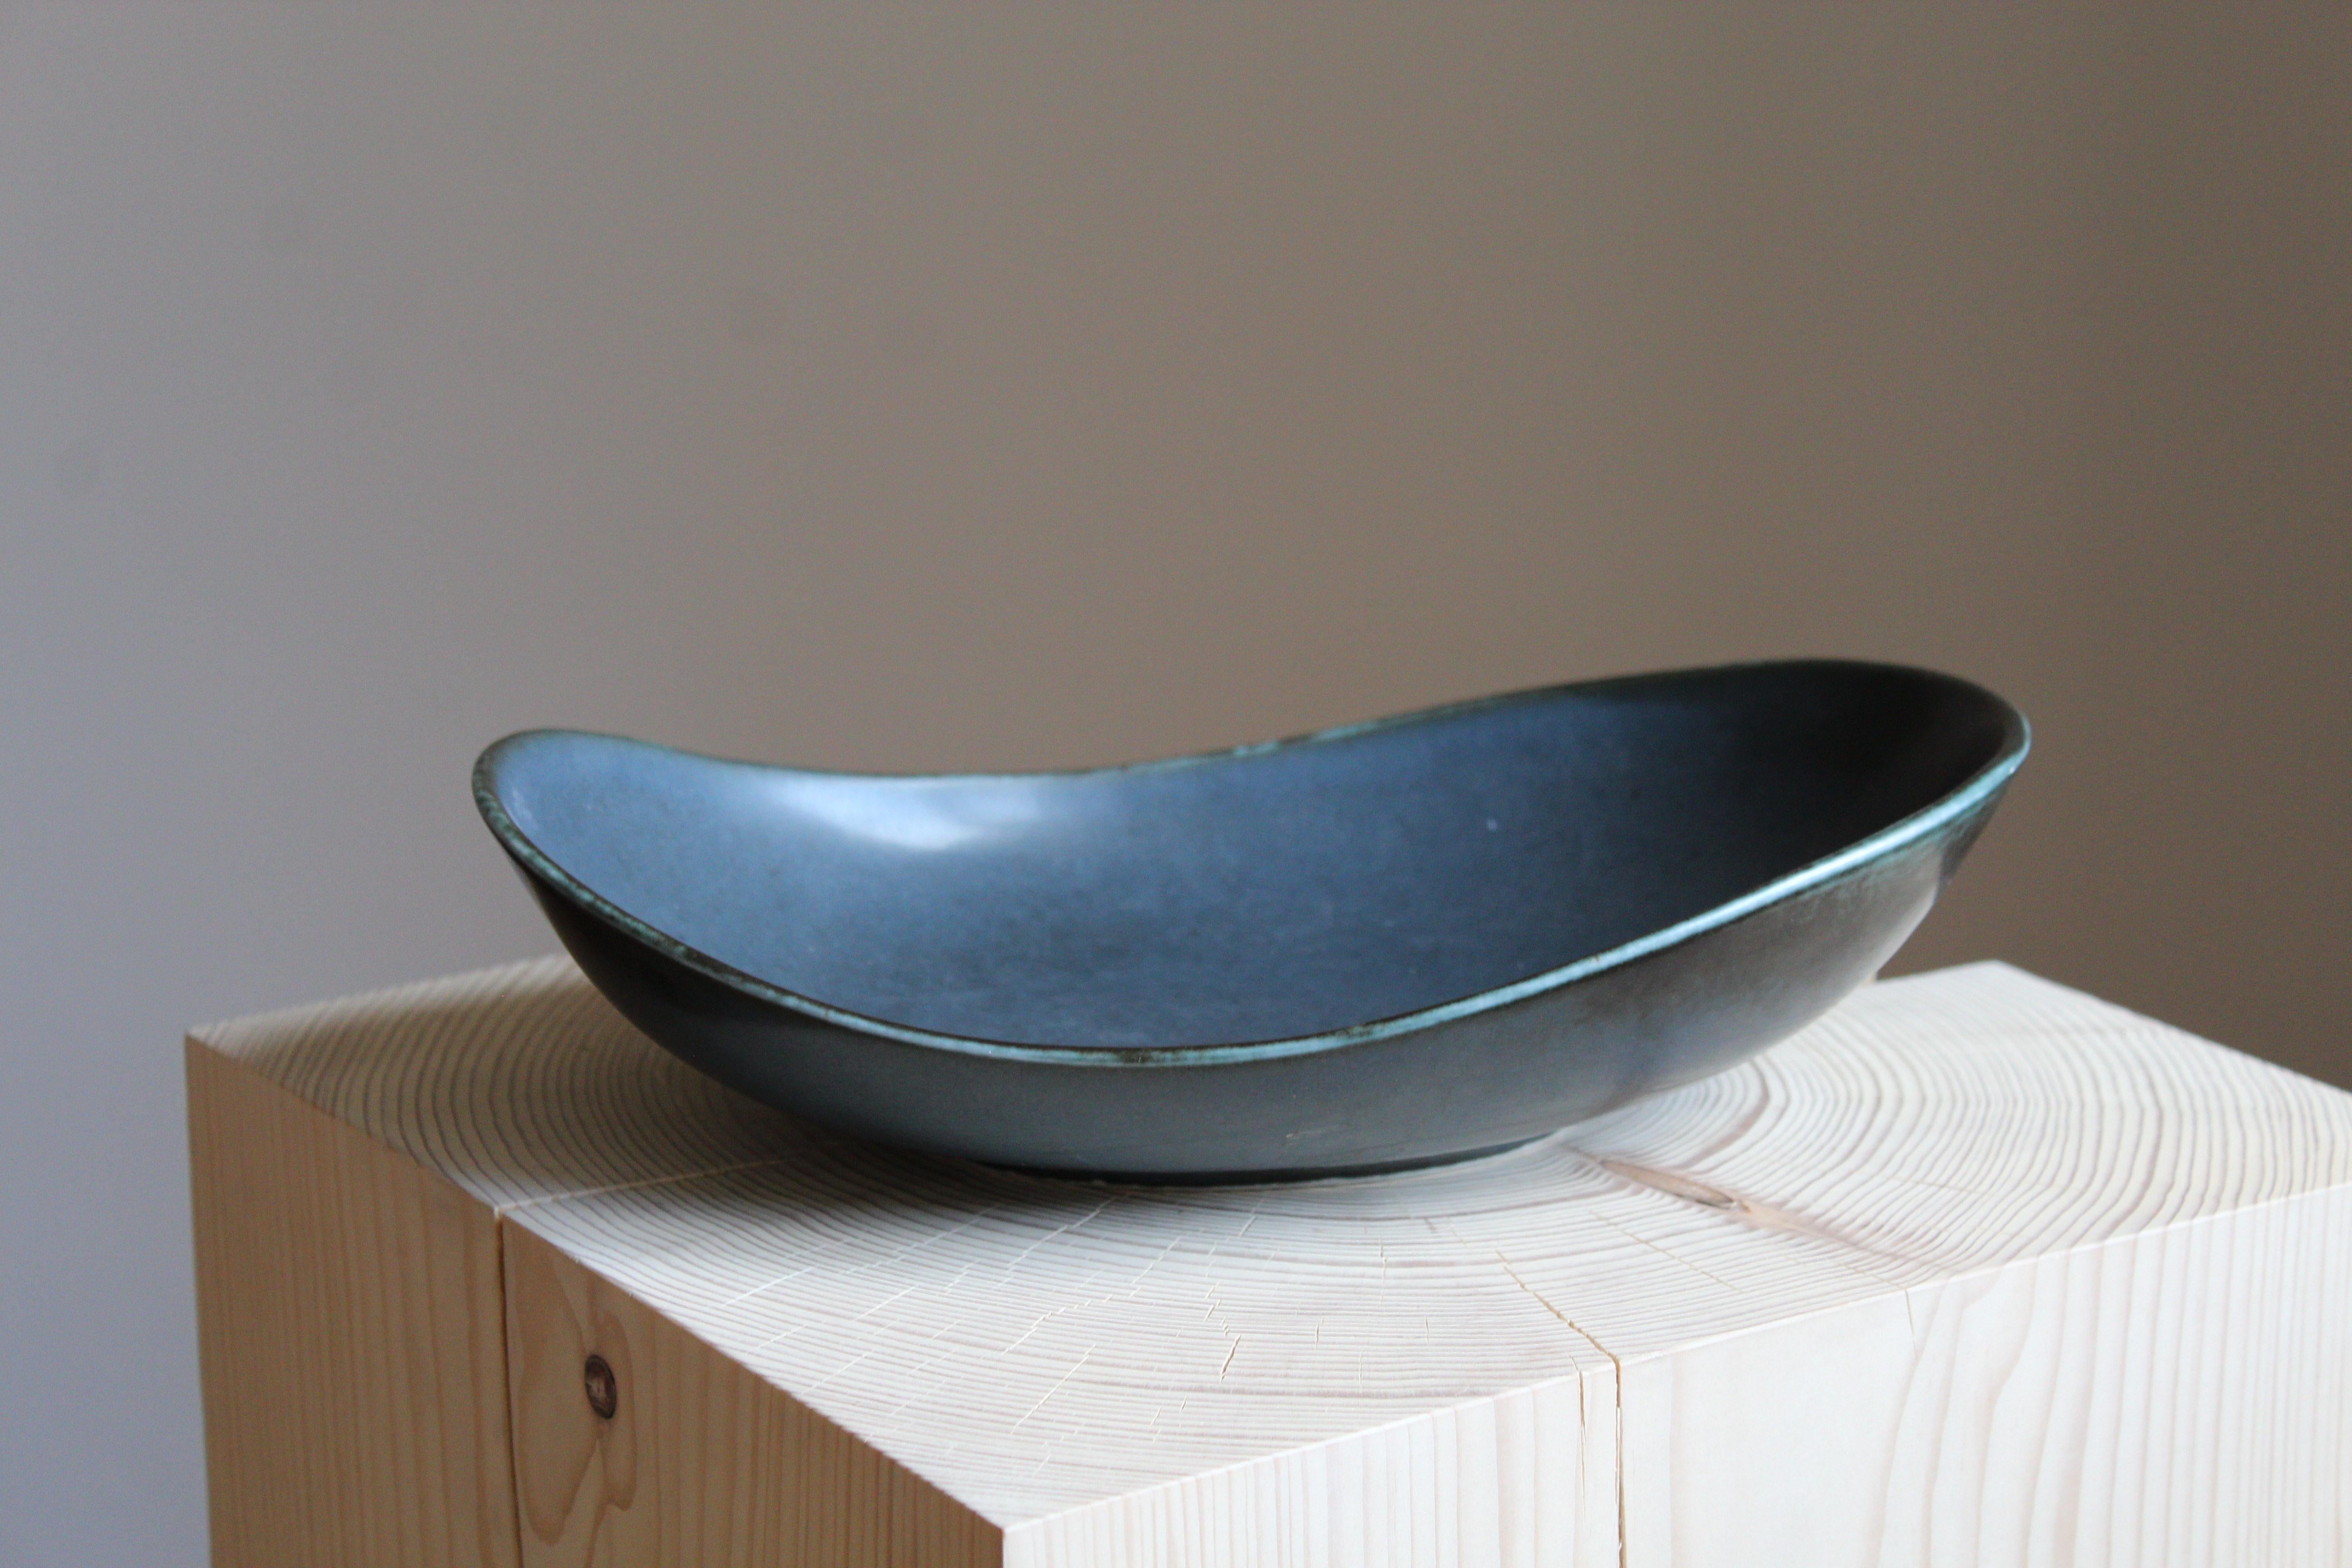 A rare and sizable bowl or dish or vide-poche by Carl-Harry Stålhane for the iconic Swedish firm Rörstrand, 1950s, Sweden. Marked and signed.

Other ceramicists of the period include Berndt Friberg, Axel Salto, Arne Bang and Wilhelm Kåge.